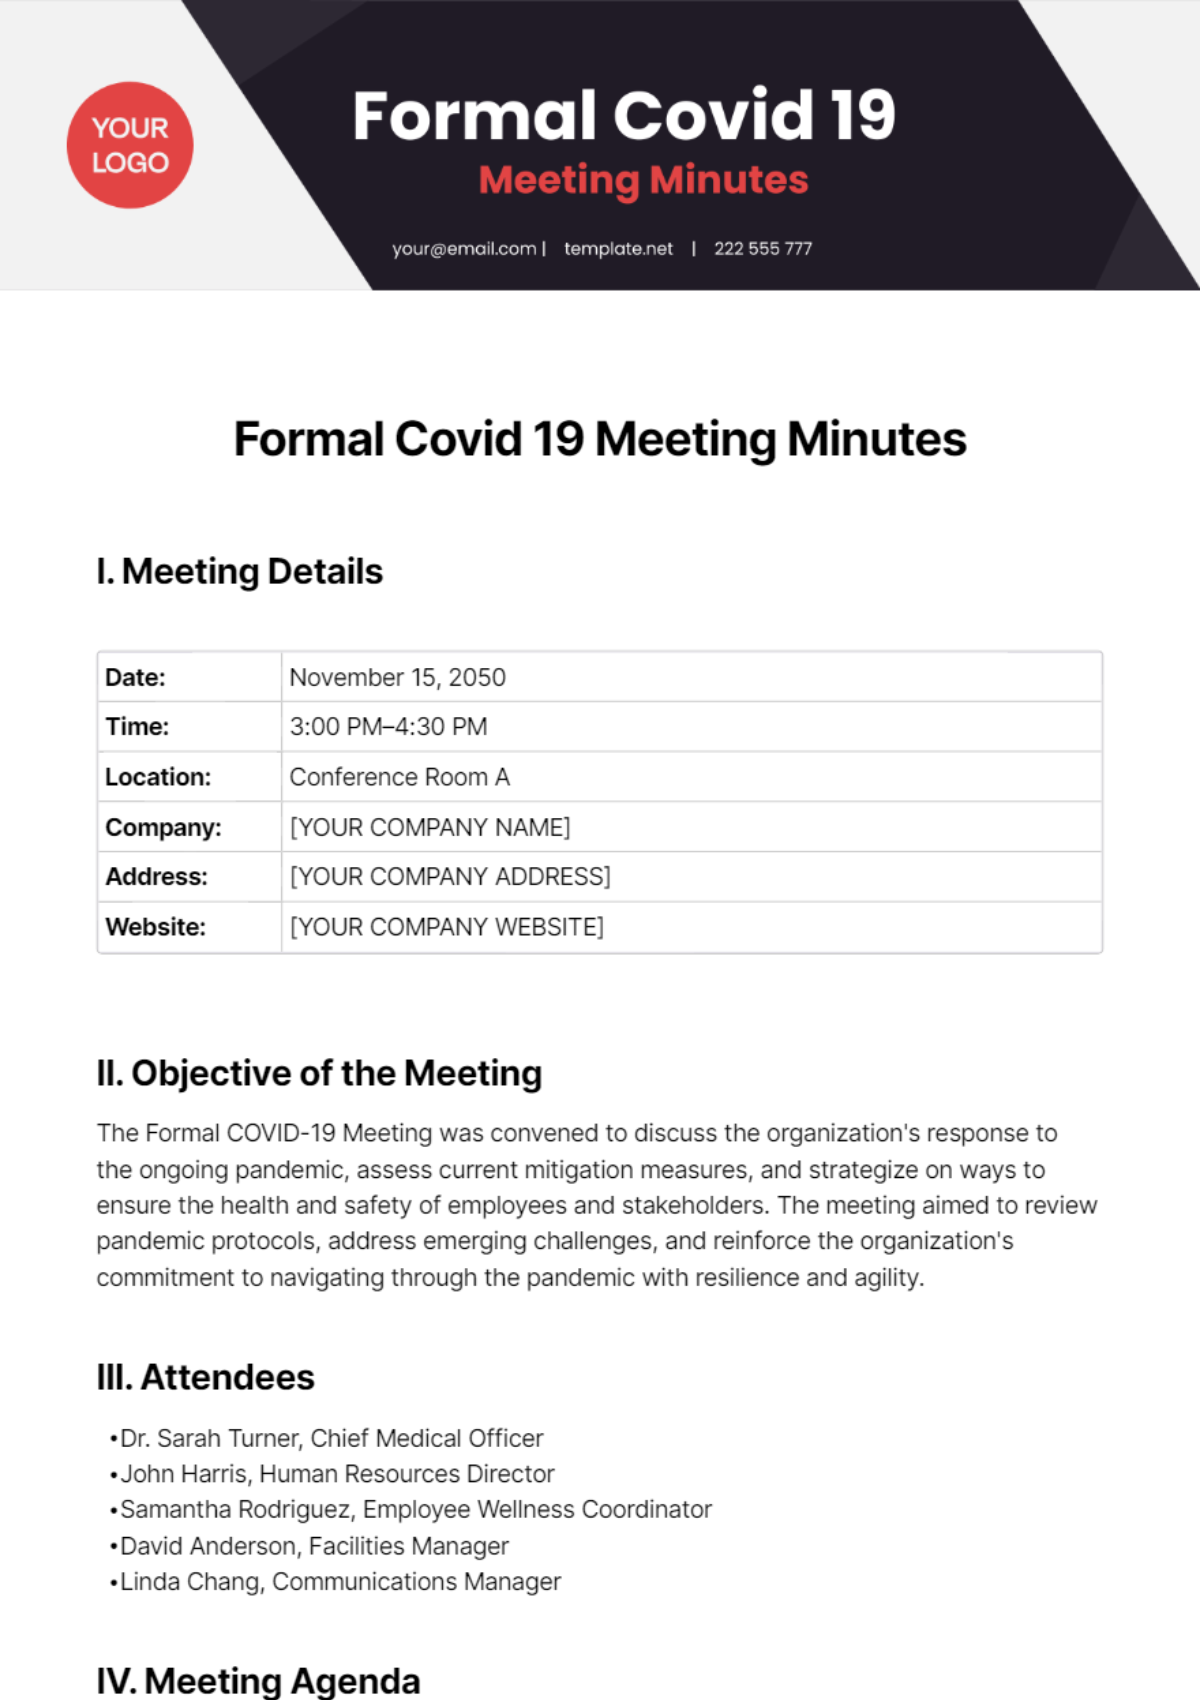 Formal Covid 19 Meeting Minutes Template